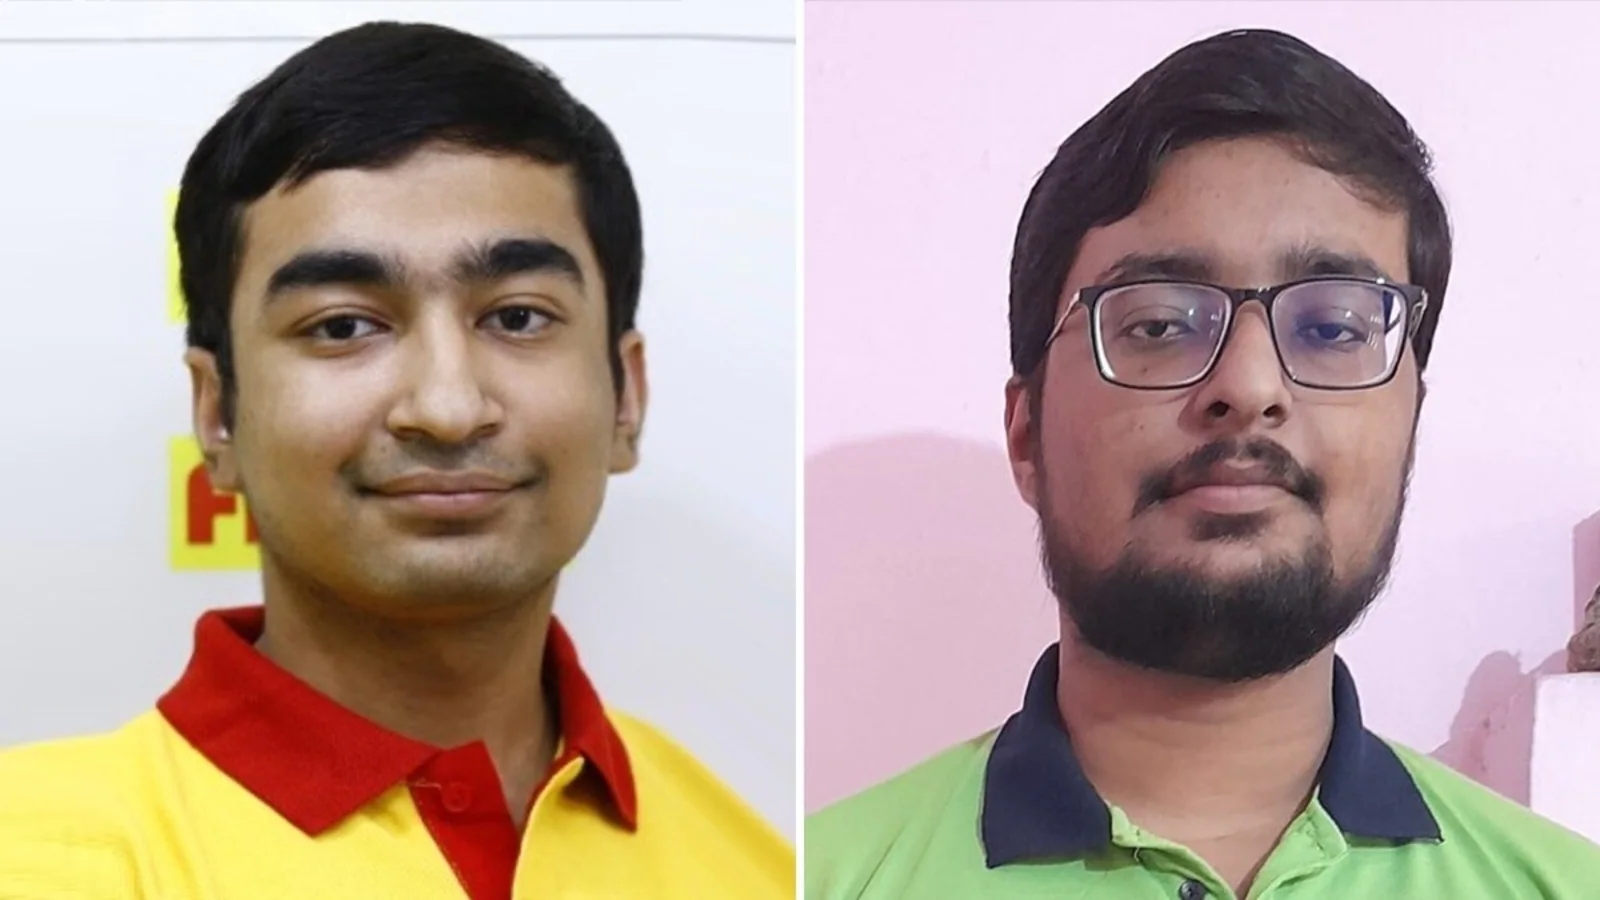 JEE Main results 2022: Meet 2 UP boys who are among 24 national toppers